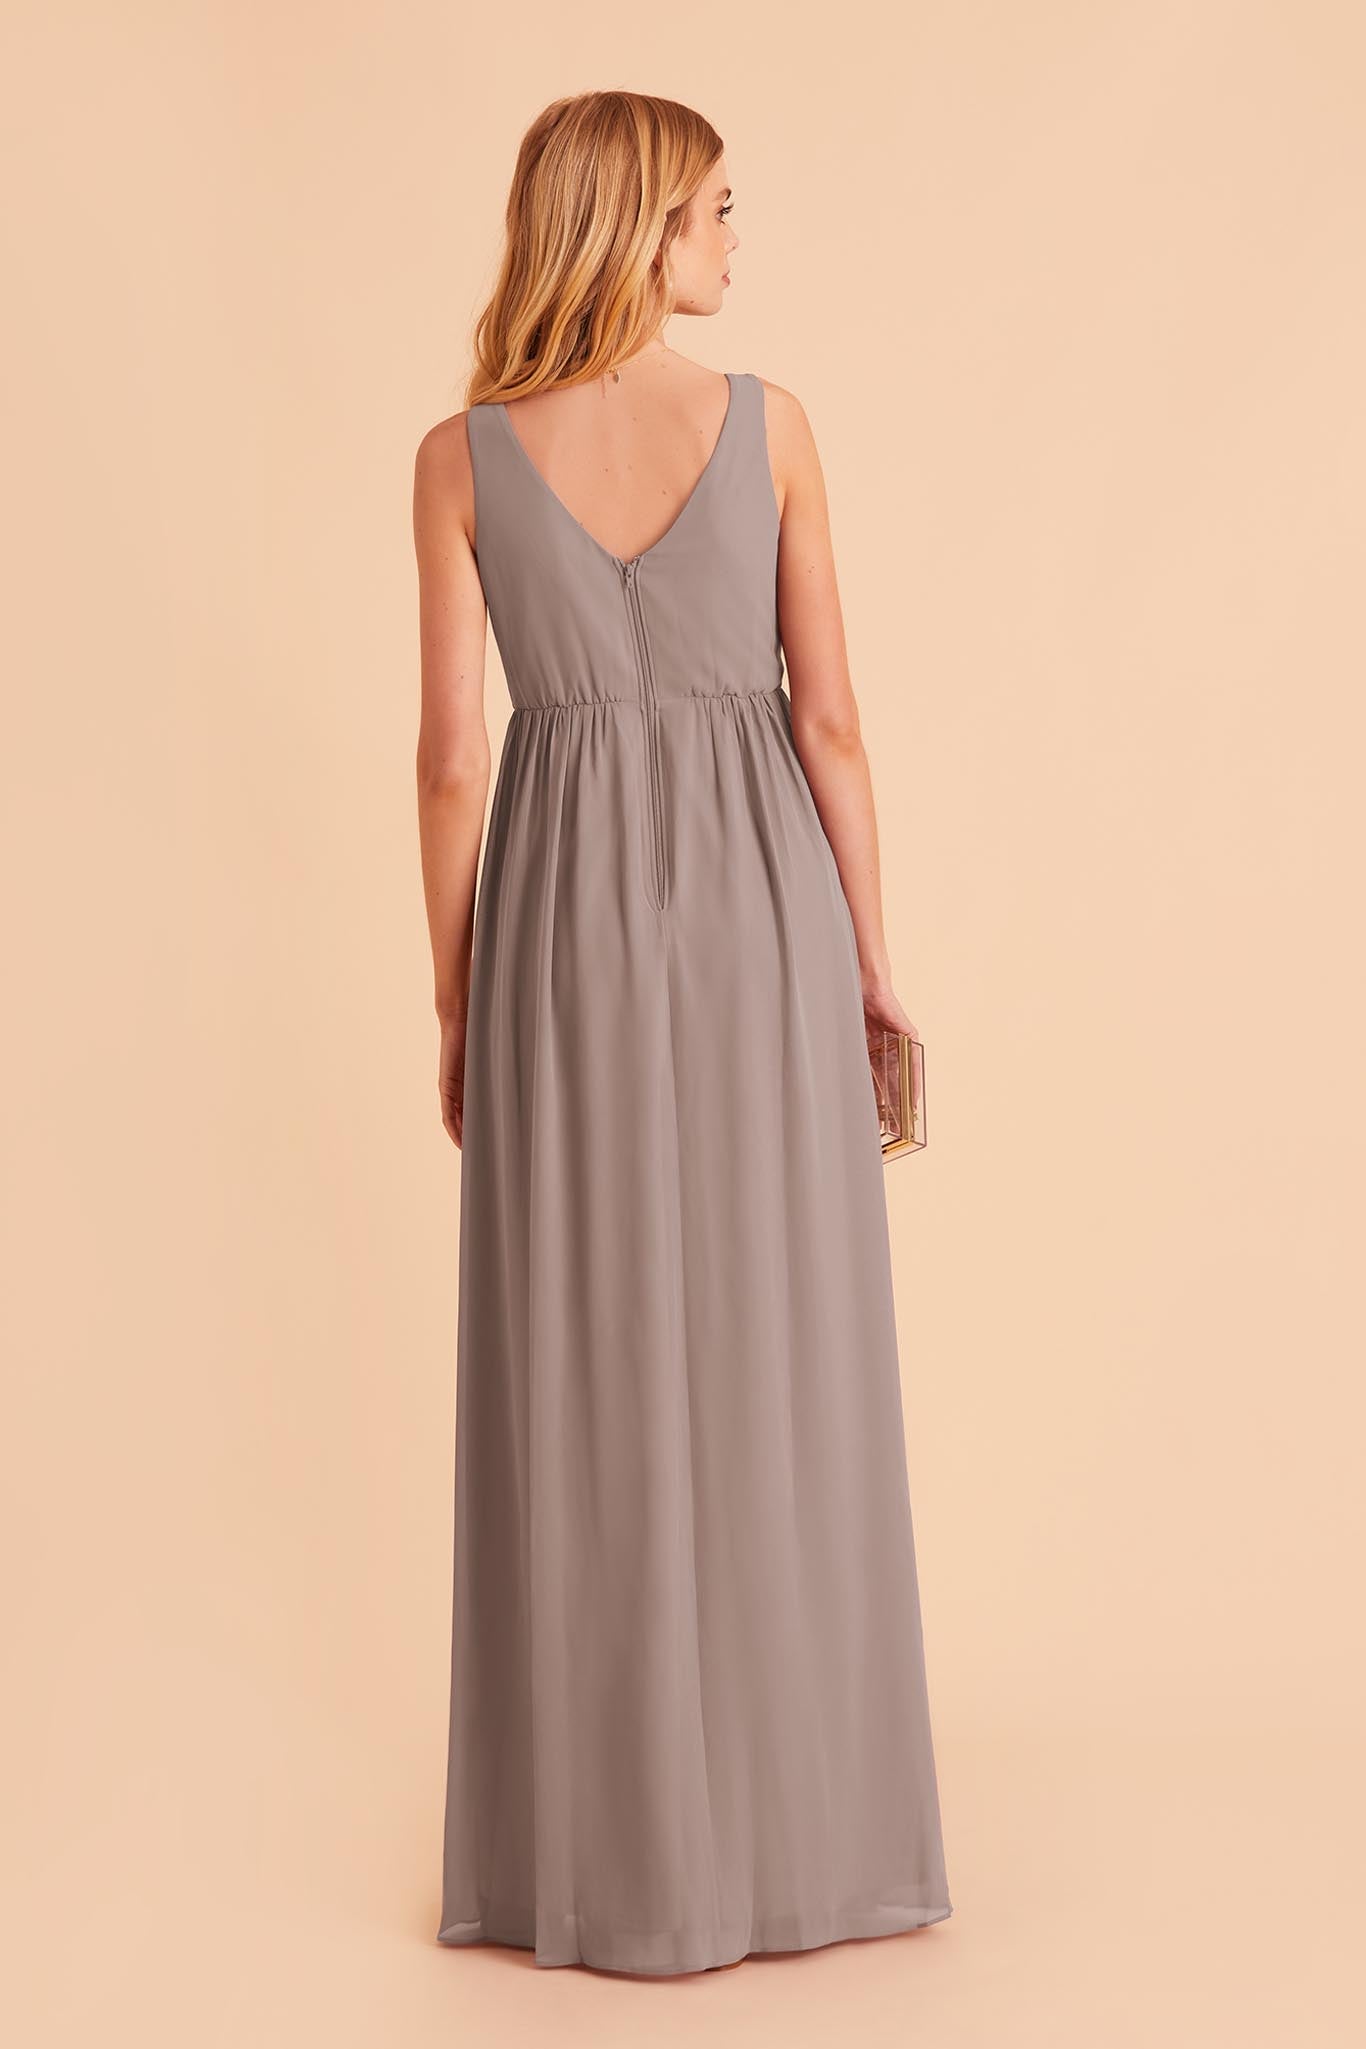 Toffee Laurie Empire Dress by Birdy Grey